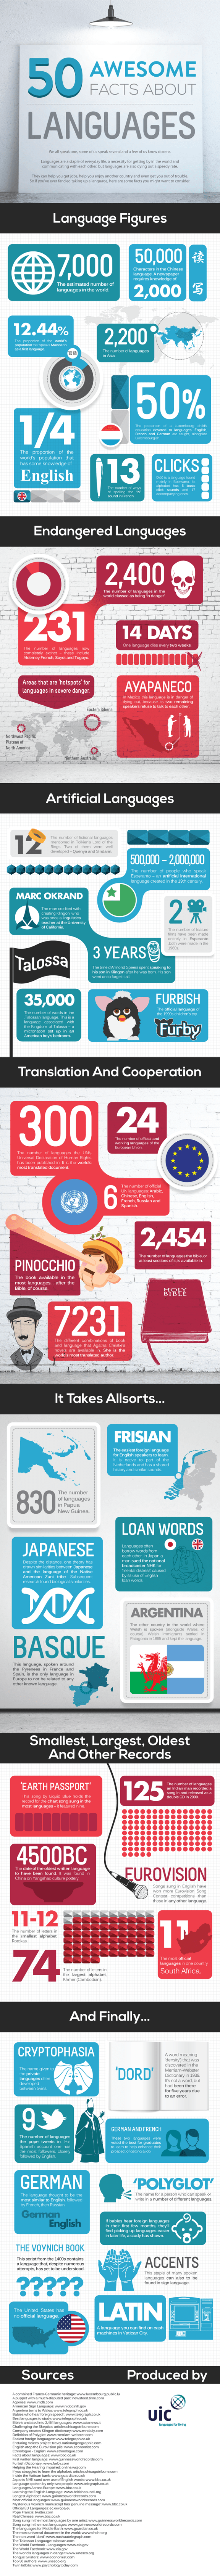 awesome facts about languages infographic